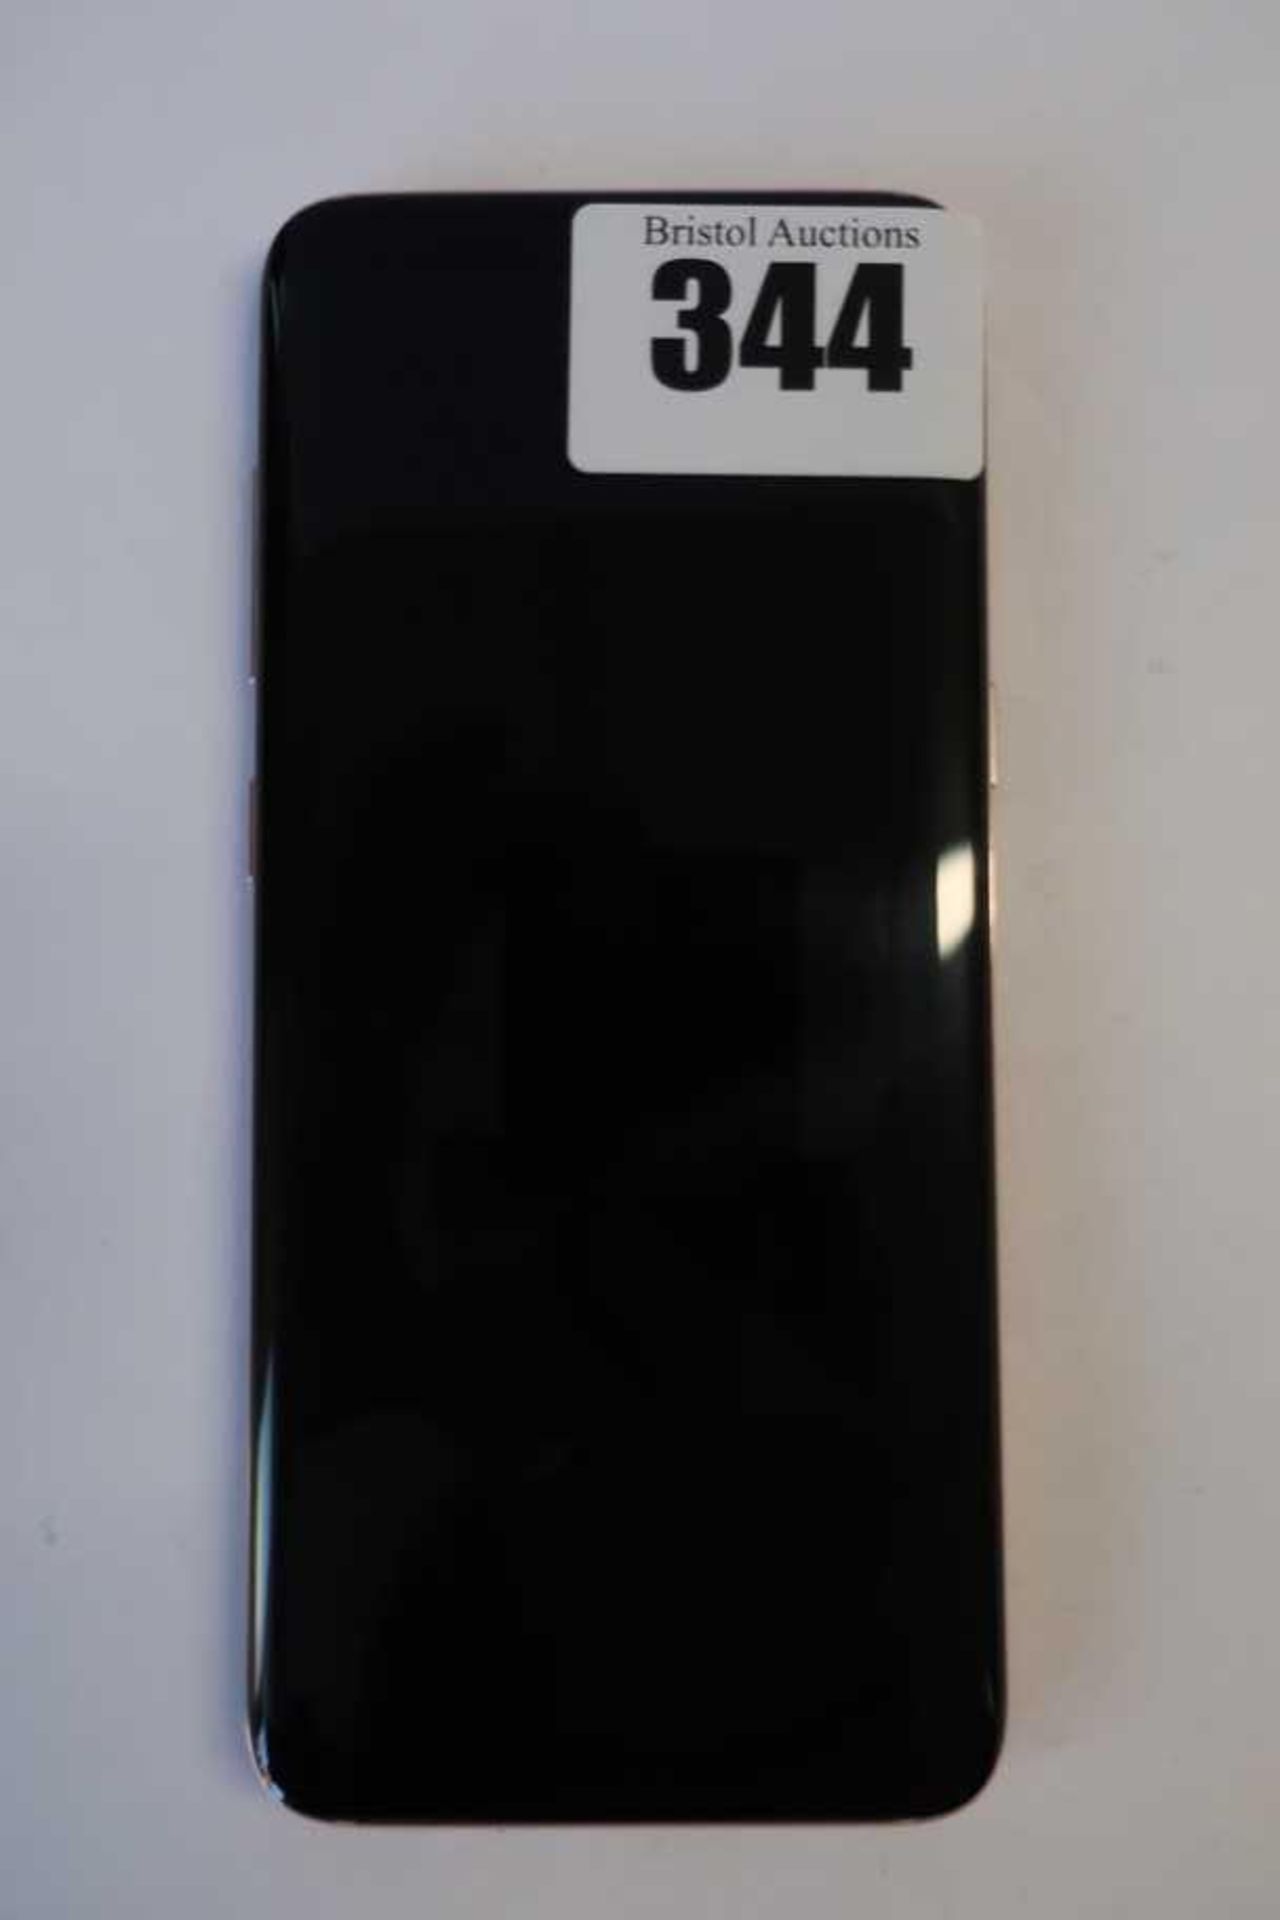 A pre-owned Samsung Galaxy S8 64GB SM-G950F in Lilac (IMEI: 352802102662130) (FRP locked, sold for